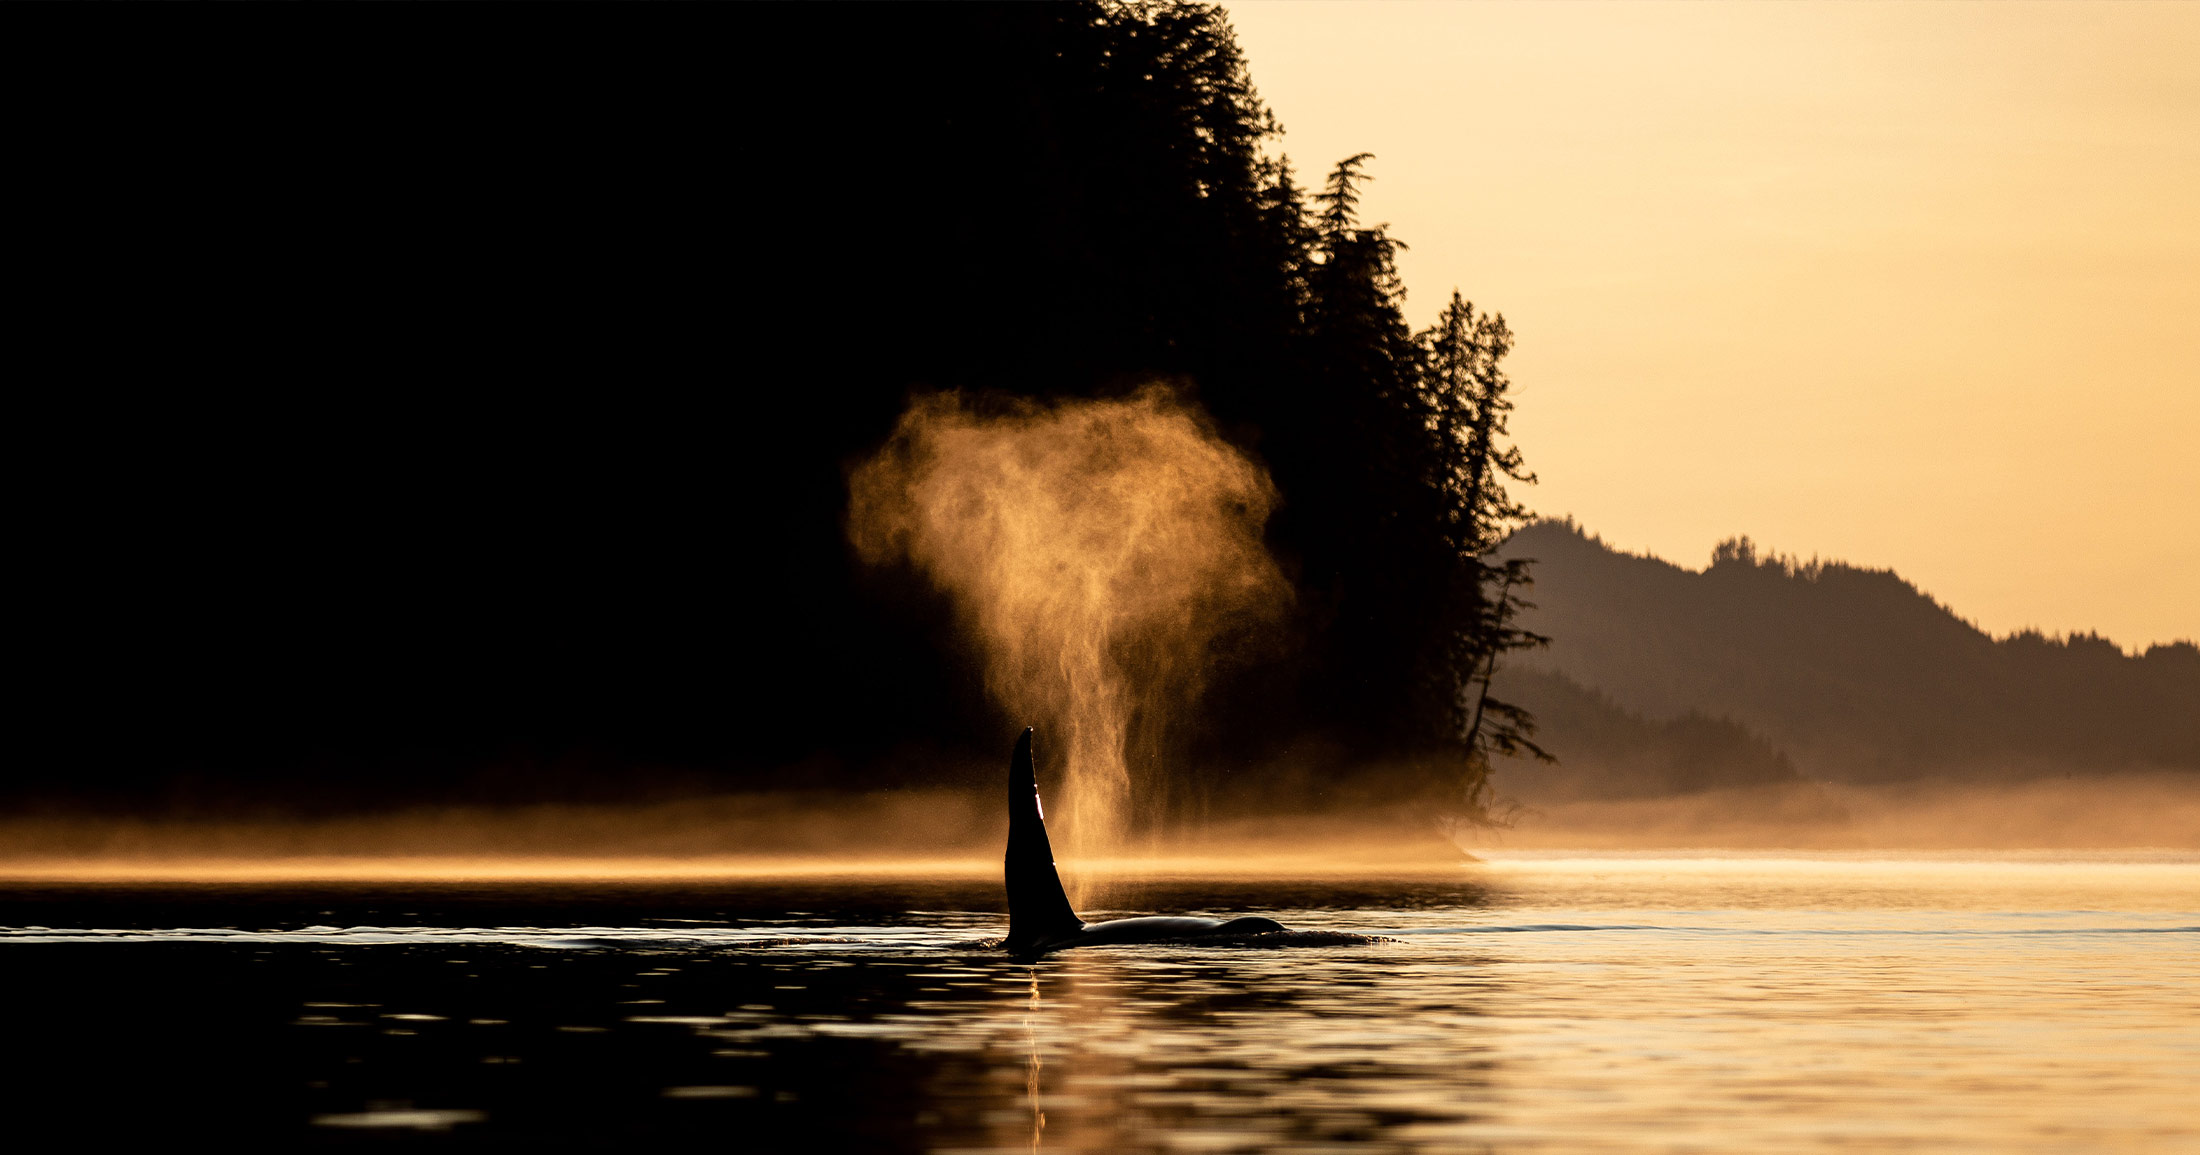 Killer whale surfacing in the sunset.